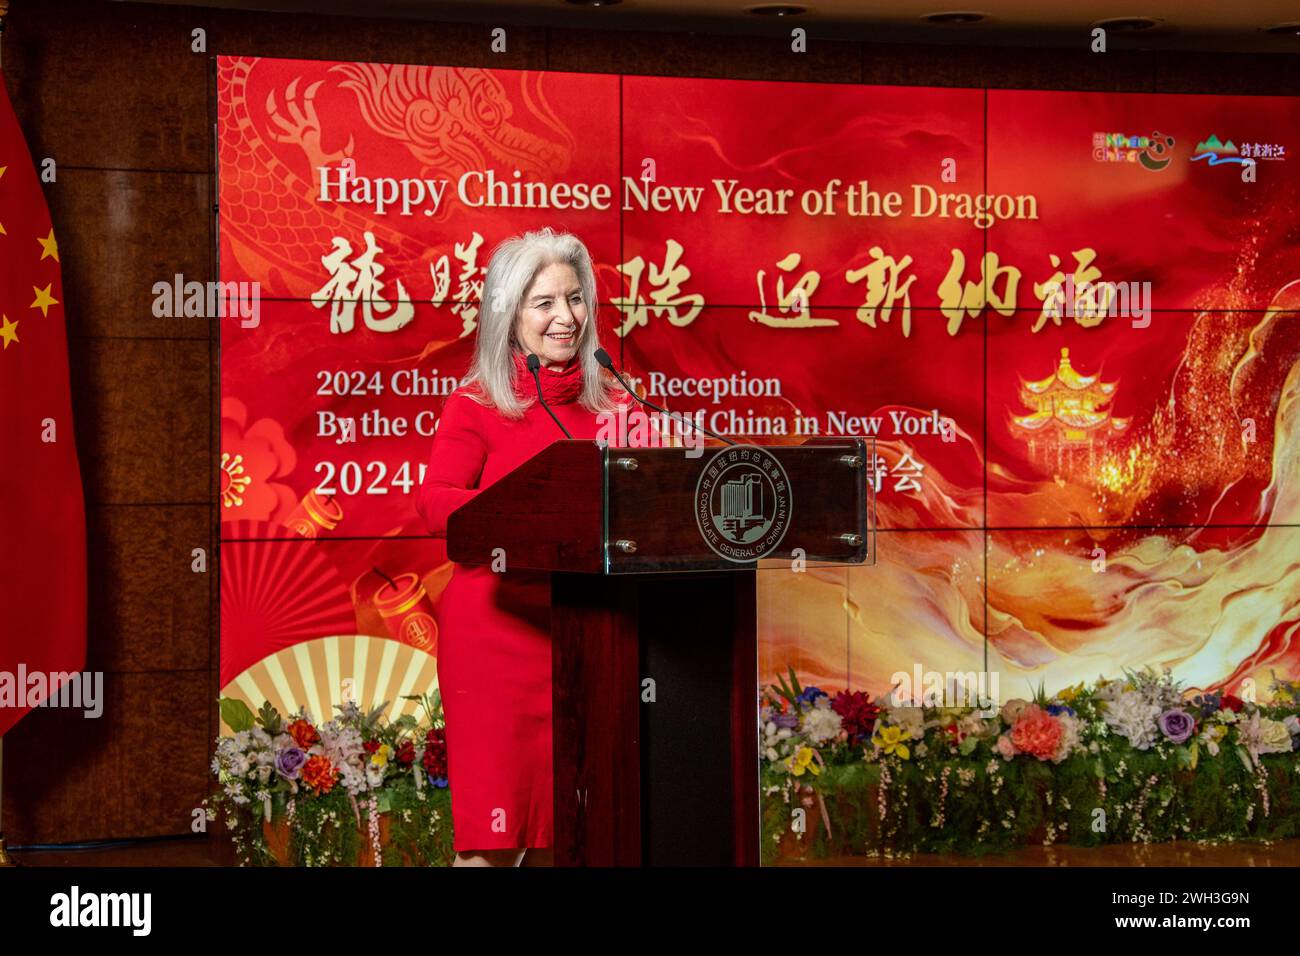 New York, Year of the Dragon at the Chinese Consulate General in New York. 5th Feb, 2024. Jan Berris, vice president of the National Committee on U.S.-China Relations, speaks at a reception in celebration of the Year of the Dragon at the Chinese Consulate General in New York, on Feb. 5, 2024. Courage and strength, as exemplified by the Year of the Dragon, are much needed to further improve U.S.-China ties, the world's most important bilateral relationship, U.S. experts have said. Credit: Winston Zhou/Xinhua/Alamy Live News Stock Photo